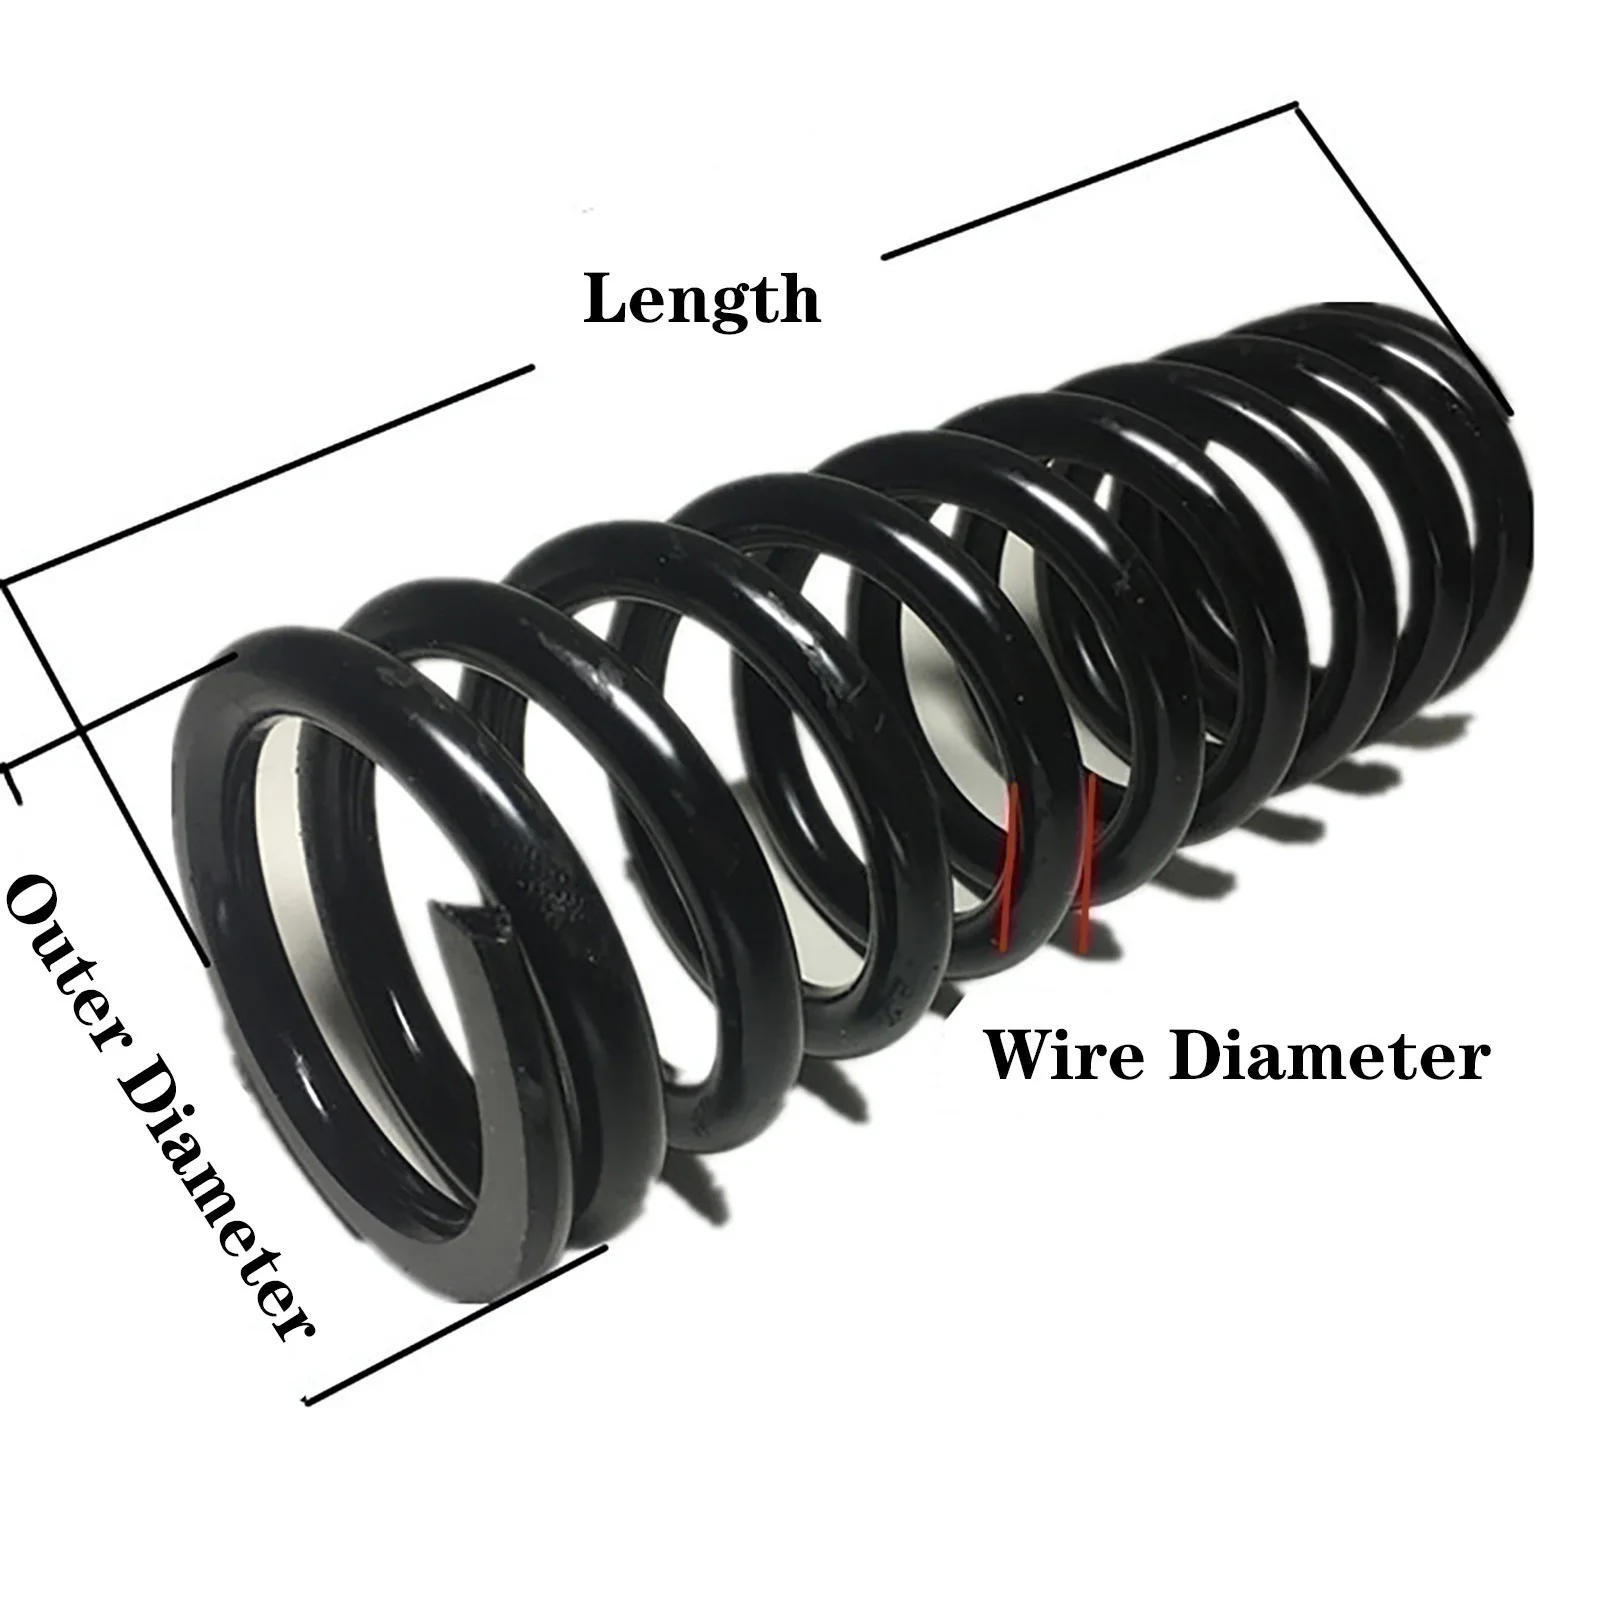 1 Pieces, 12x150x200mm, Elastic Compression Spring, 12mm Wire Diameter, 150mm Outer Diameter, 200mm Length, Both Ends Are